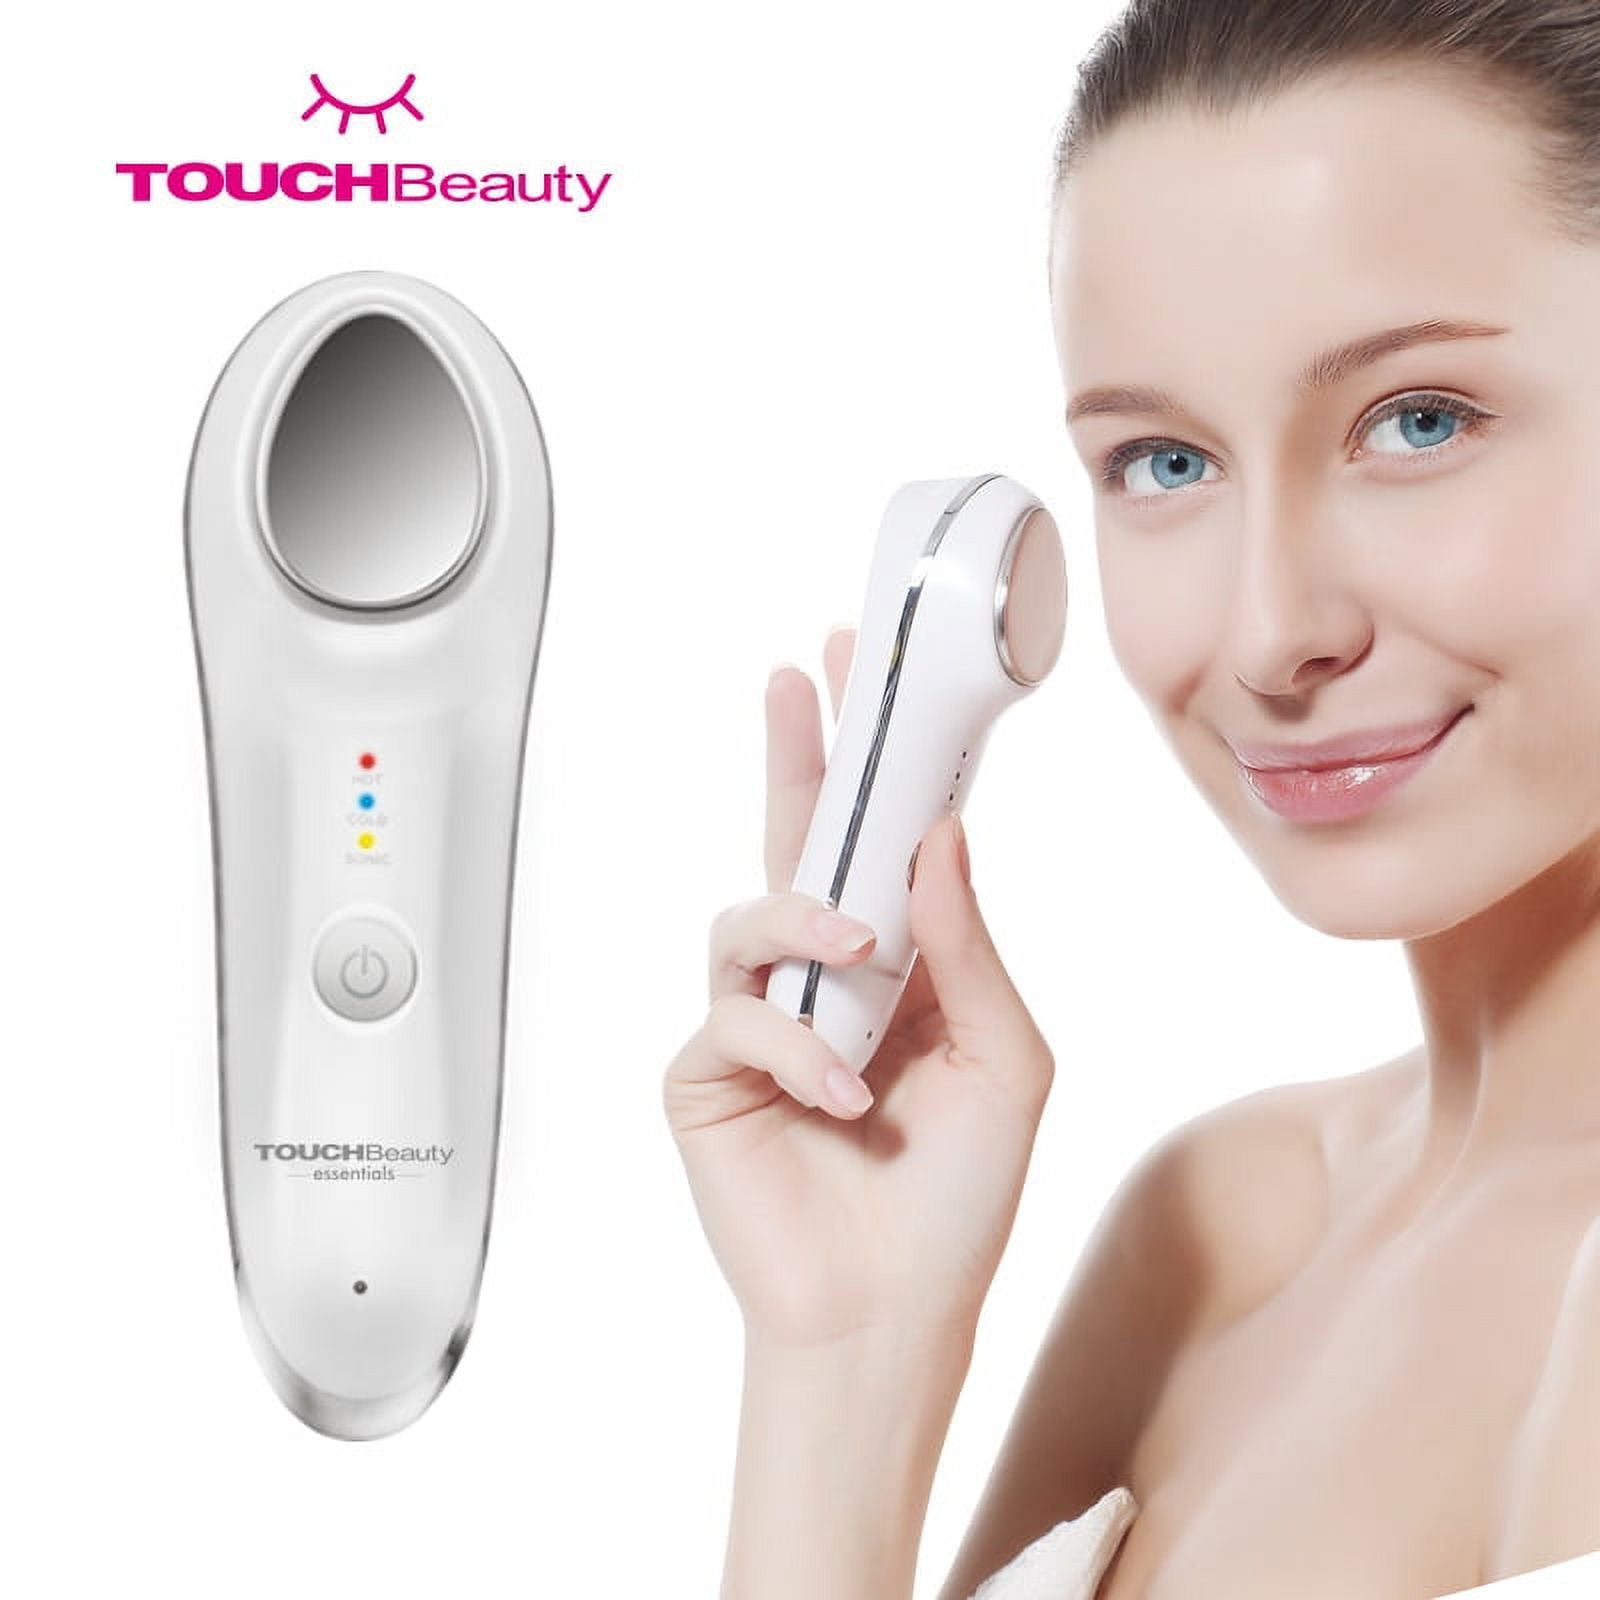 Elegant Home Fashions TB-1389 Touch Beauty Hot & Cool Massager